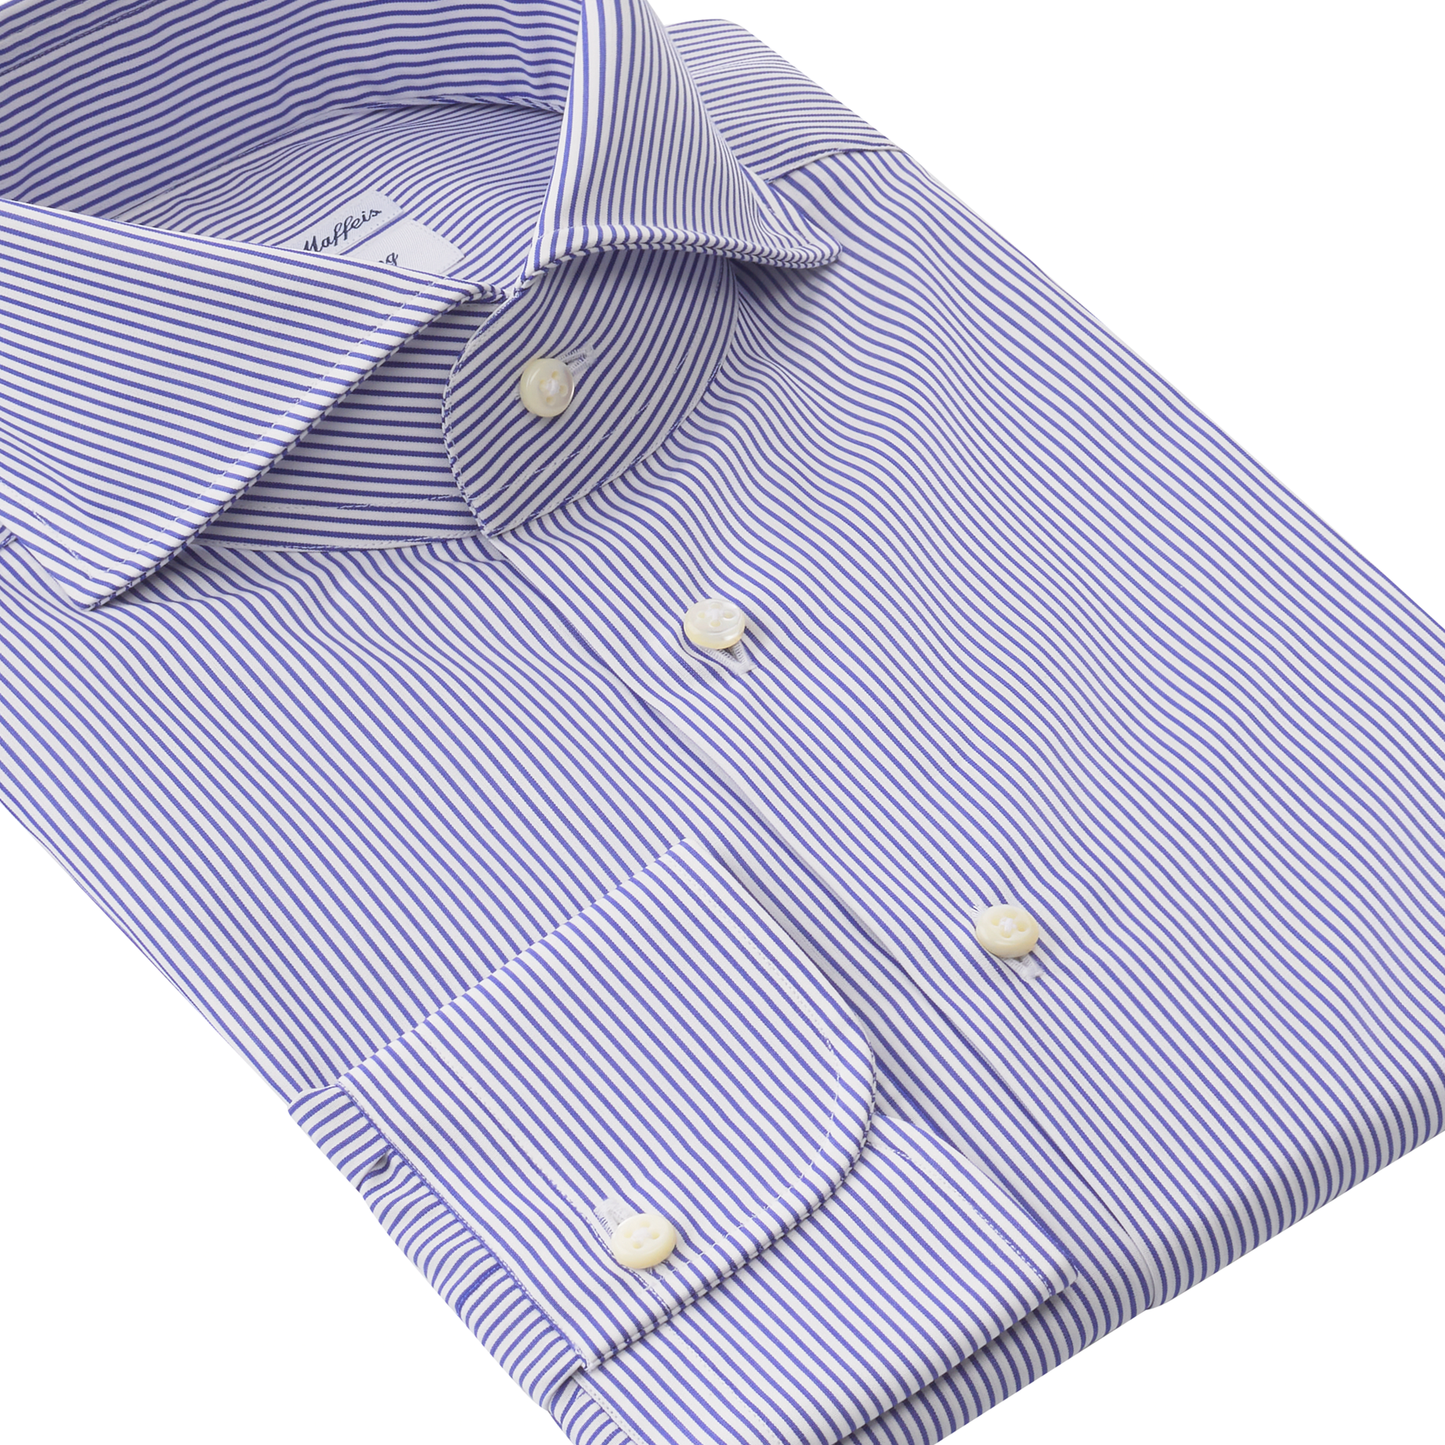 Emanuele Maffeis "All Day Long Collection" Striped Cotton Blue Shirt - SARTALE